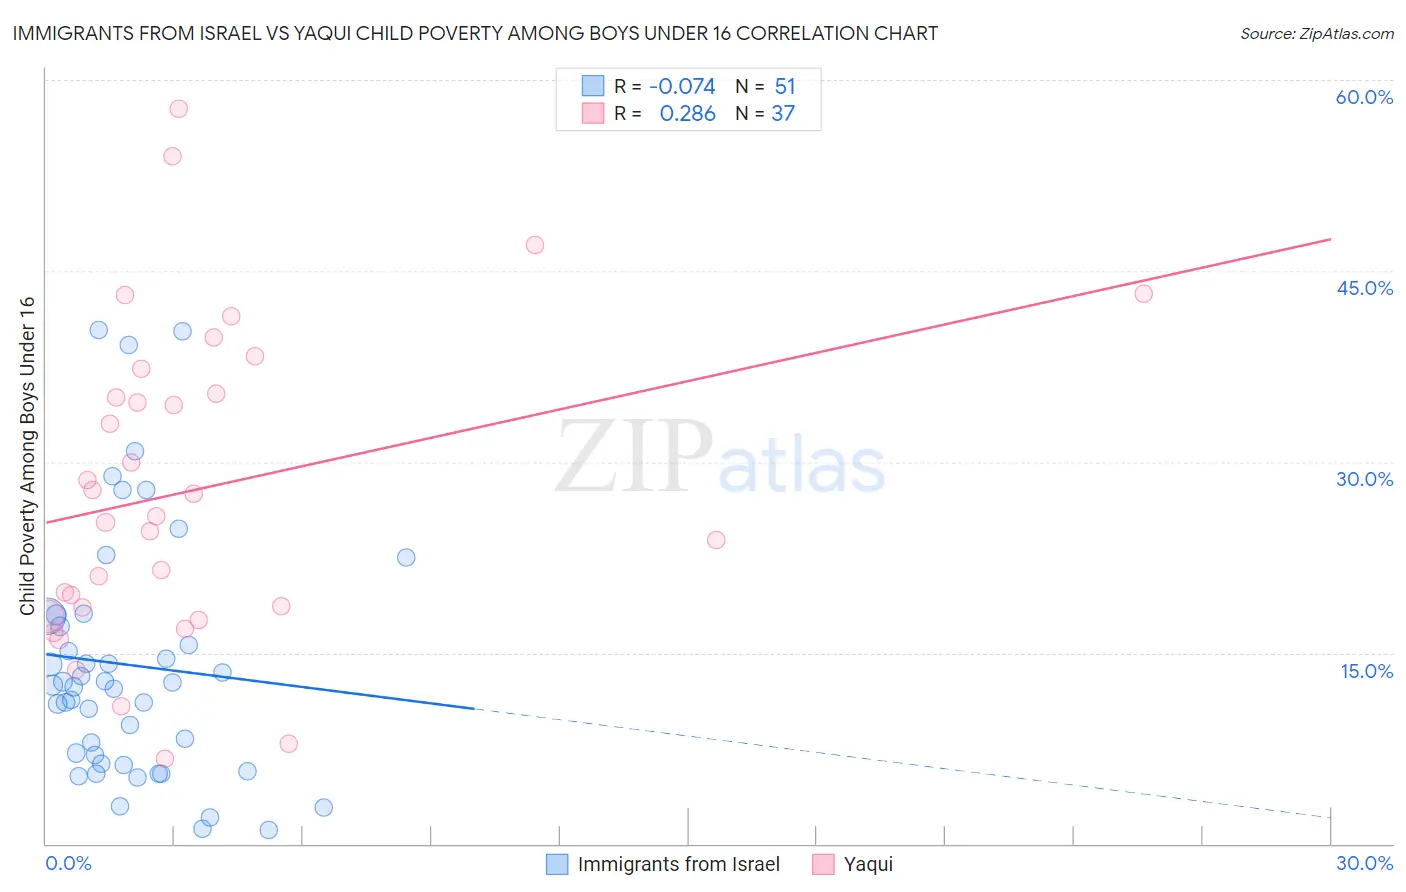 Immigrants from Israel vs Yaqui Child Poverty Among Boys Under 16